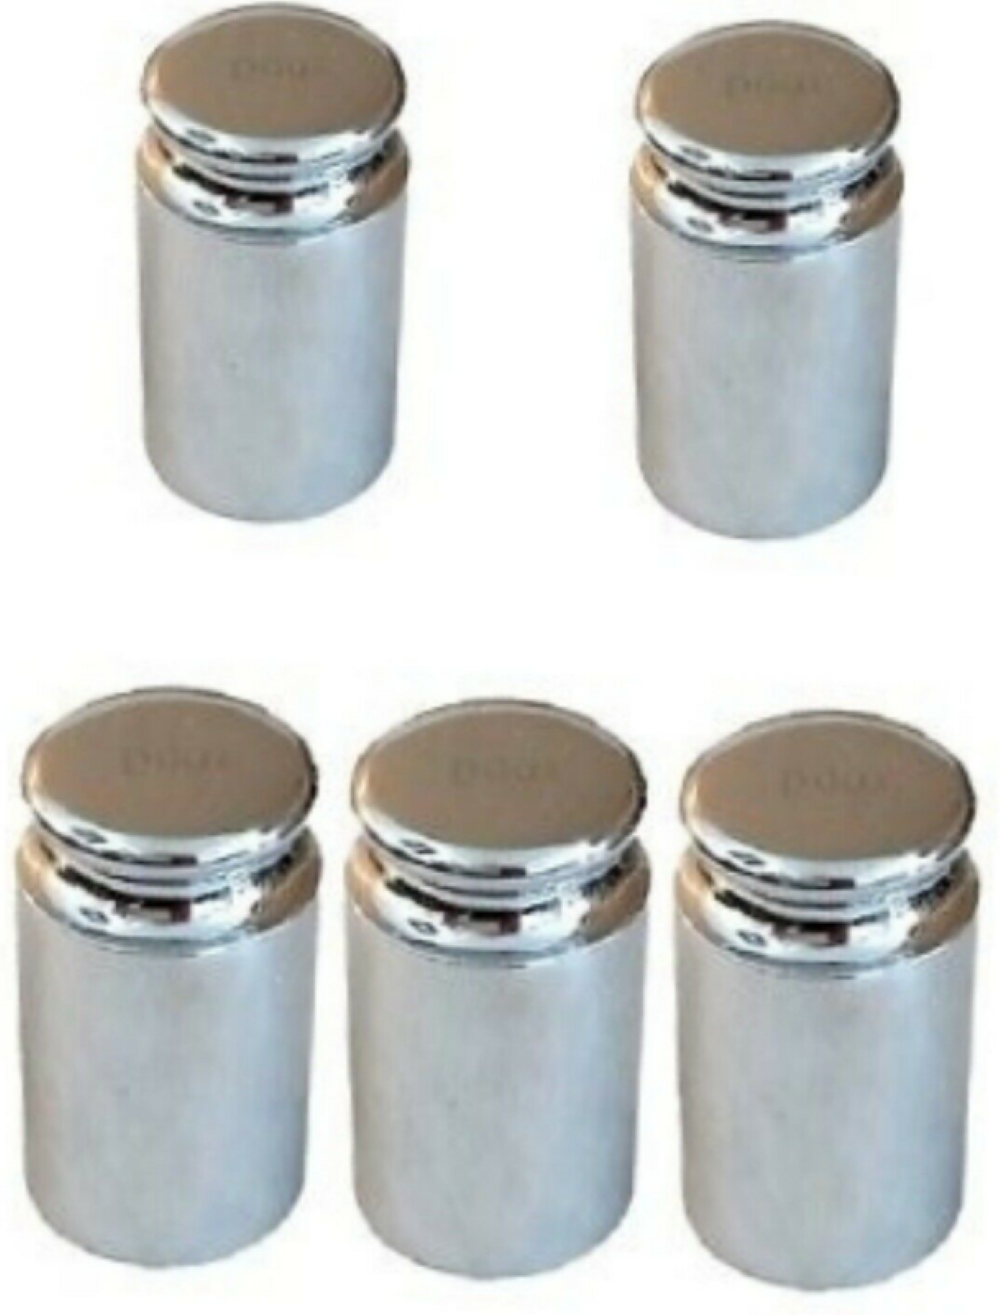 5 x Calibration Weight 500g Precision Chrome Plated Steel for Balance Scales